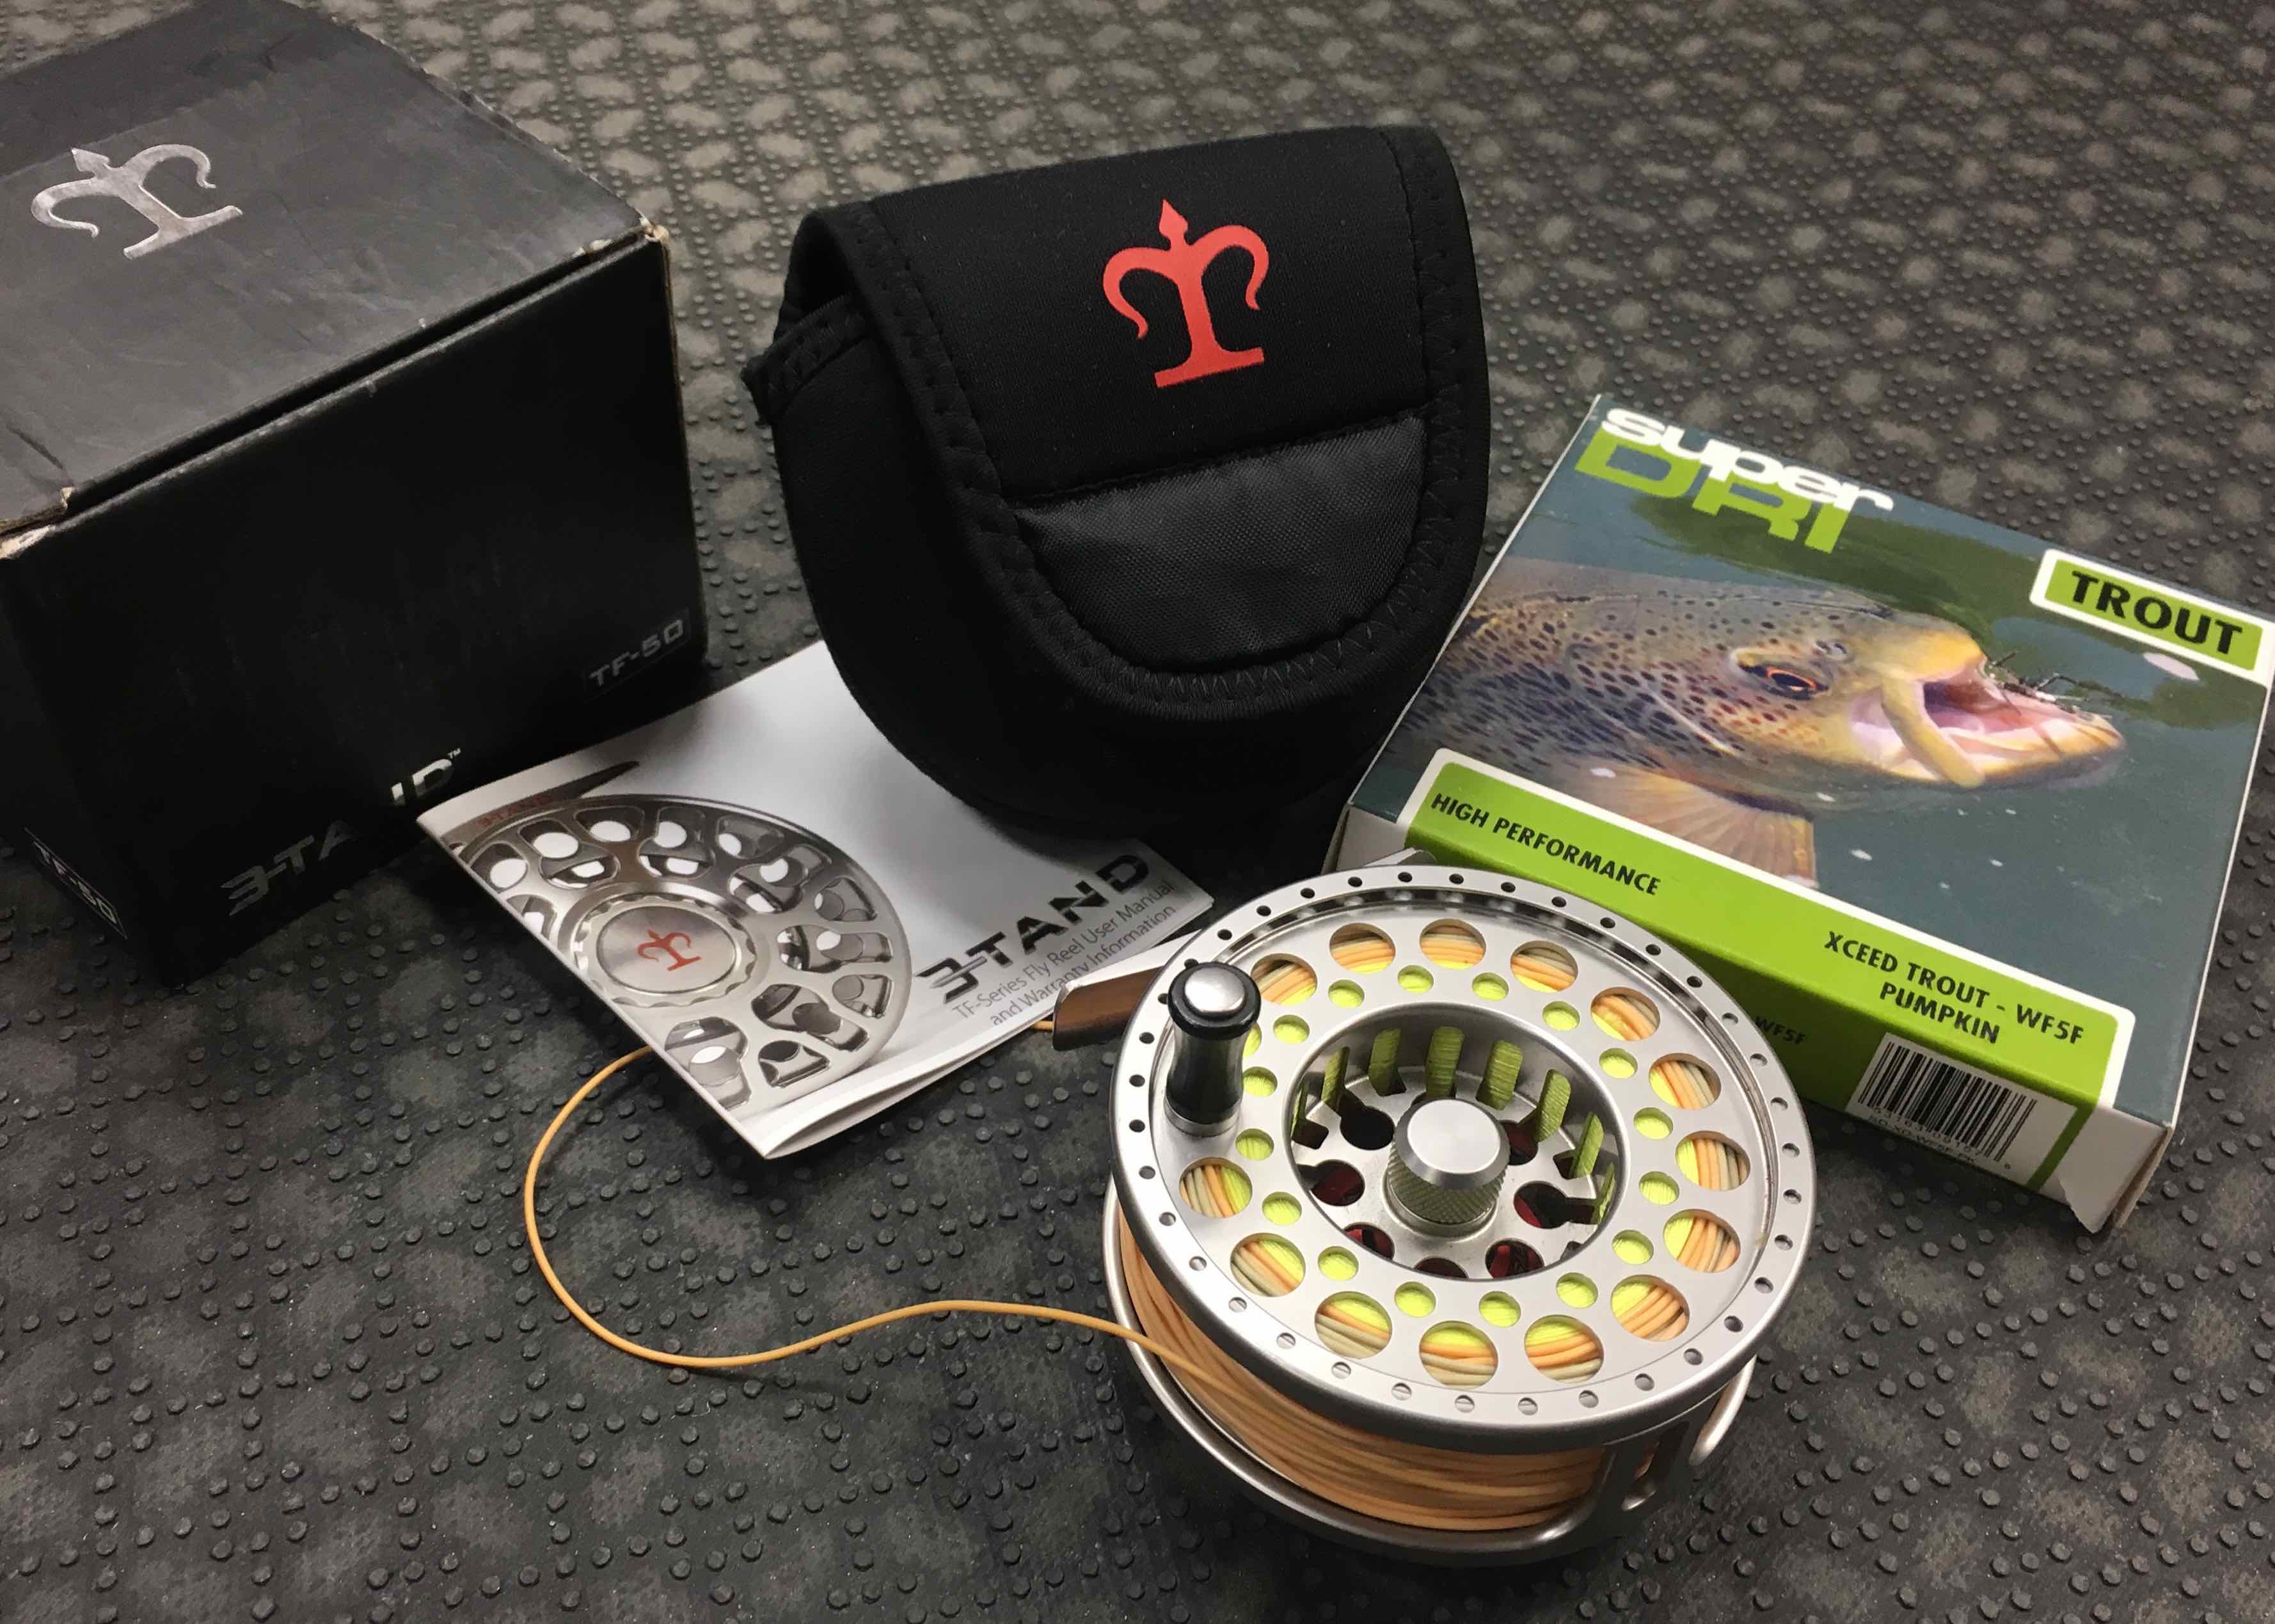 SOLD! – 3-Tand – TF50 Fly Reel c/w Airflo XCeed WF5F & Backing